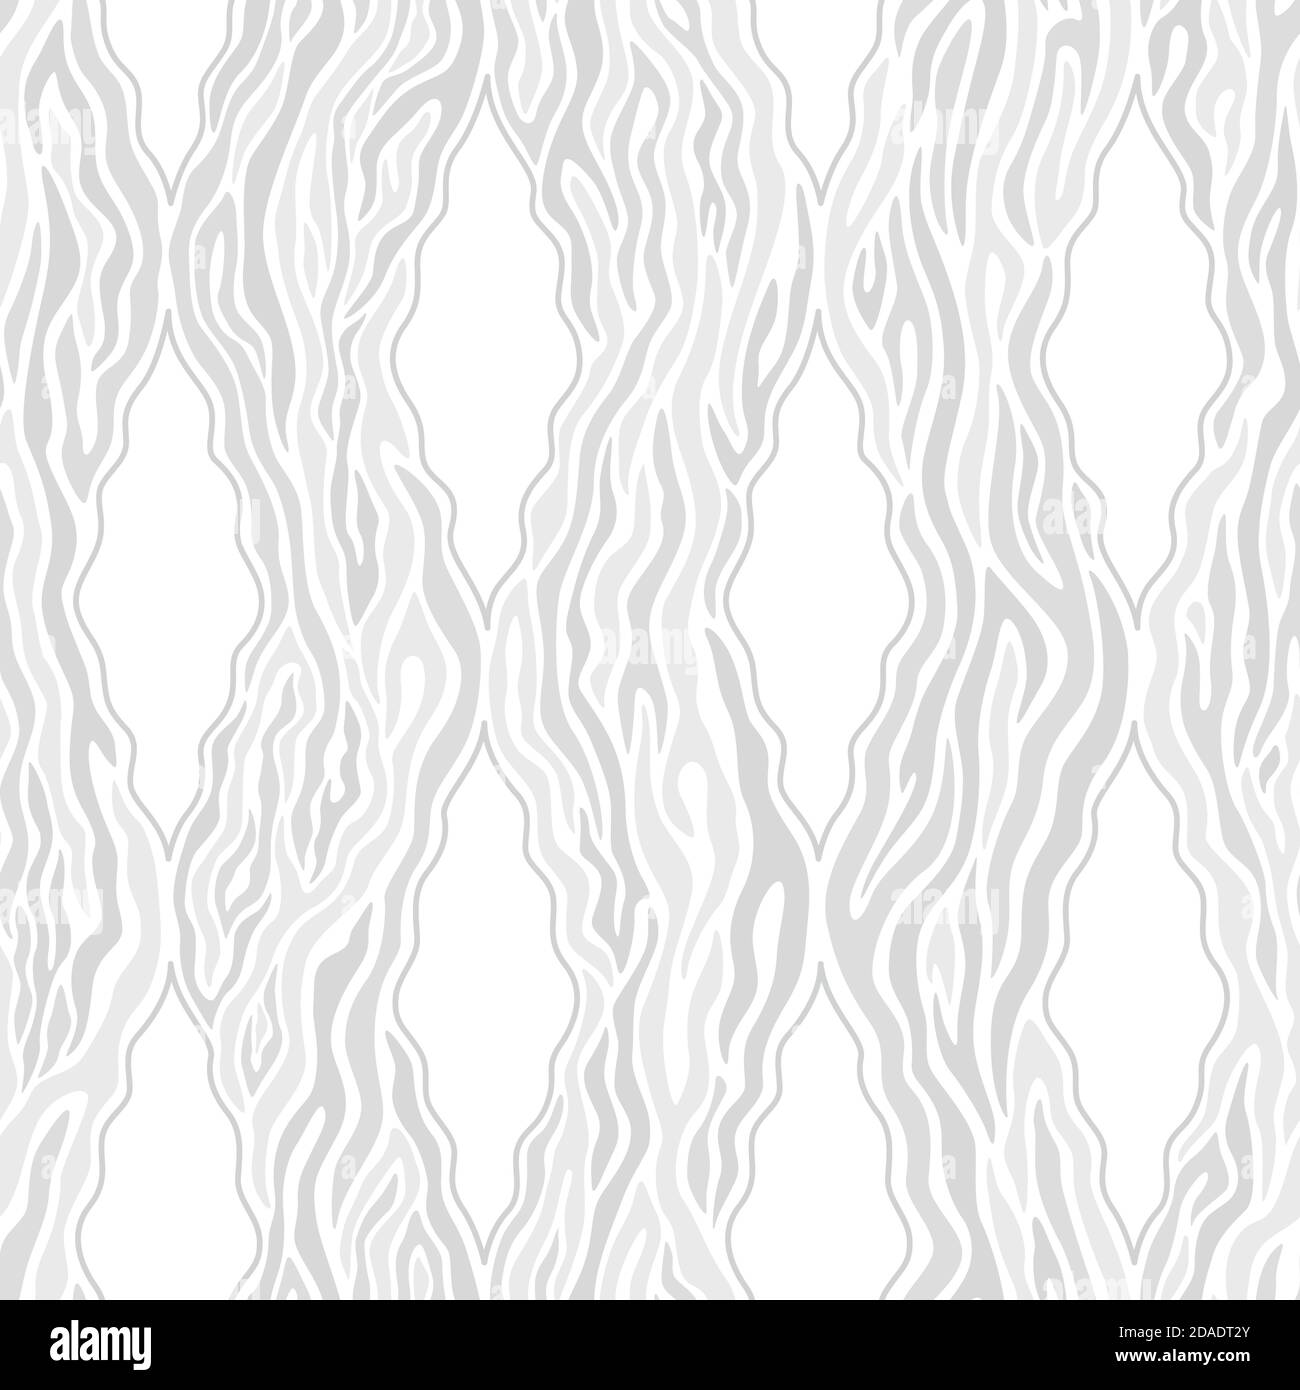 Batik seamless pattern. Subtle white hand drawn vector illustration pattern for surface, t shirt design, print, poster, icon, web, graphic designs. Stock Vector